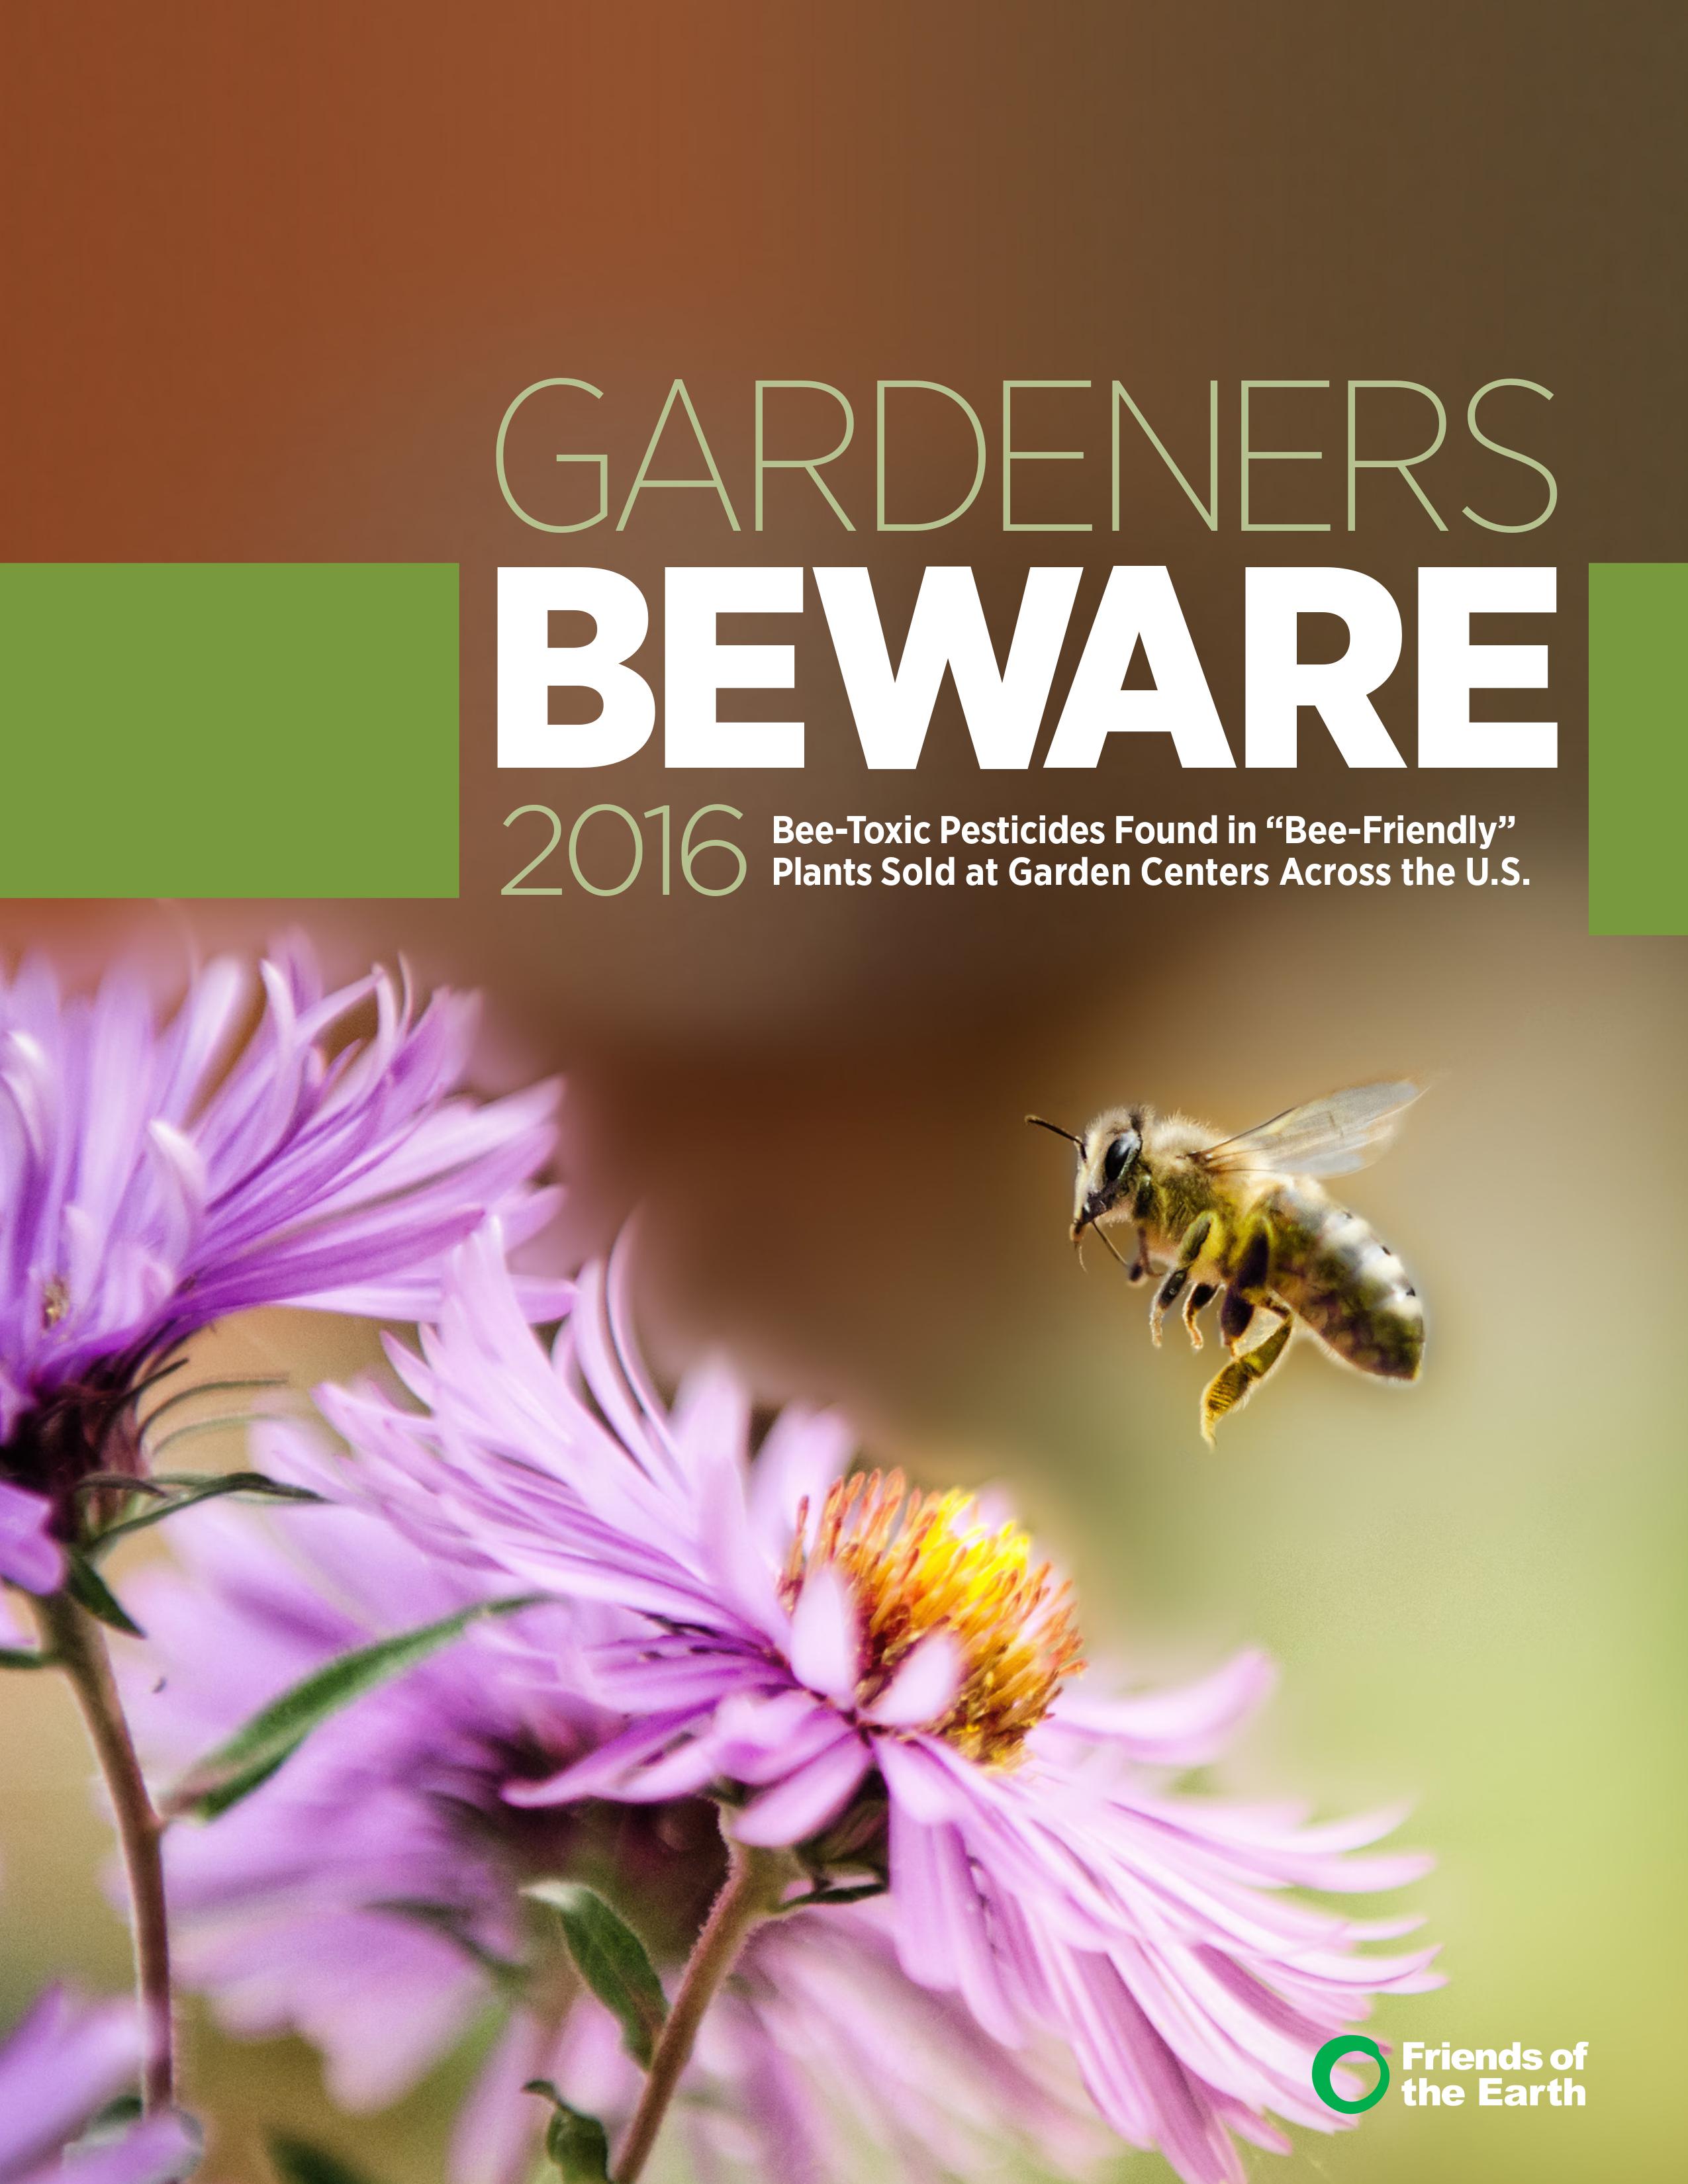 Gardeners Beware: Bee-Toxic Pesticides Found in "Bee-Friendly" Plants Sold at Garden Centers Across the U.S.